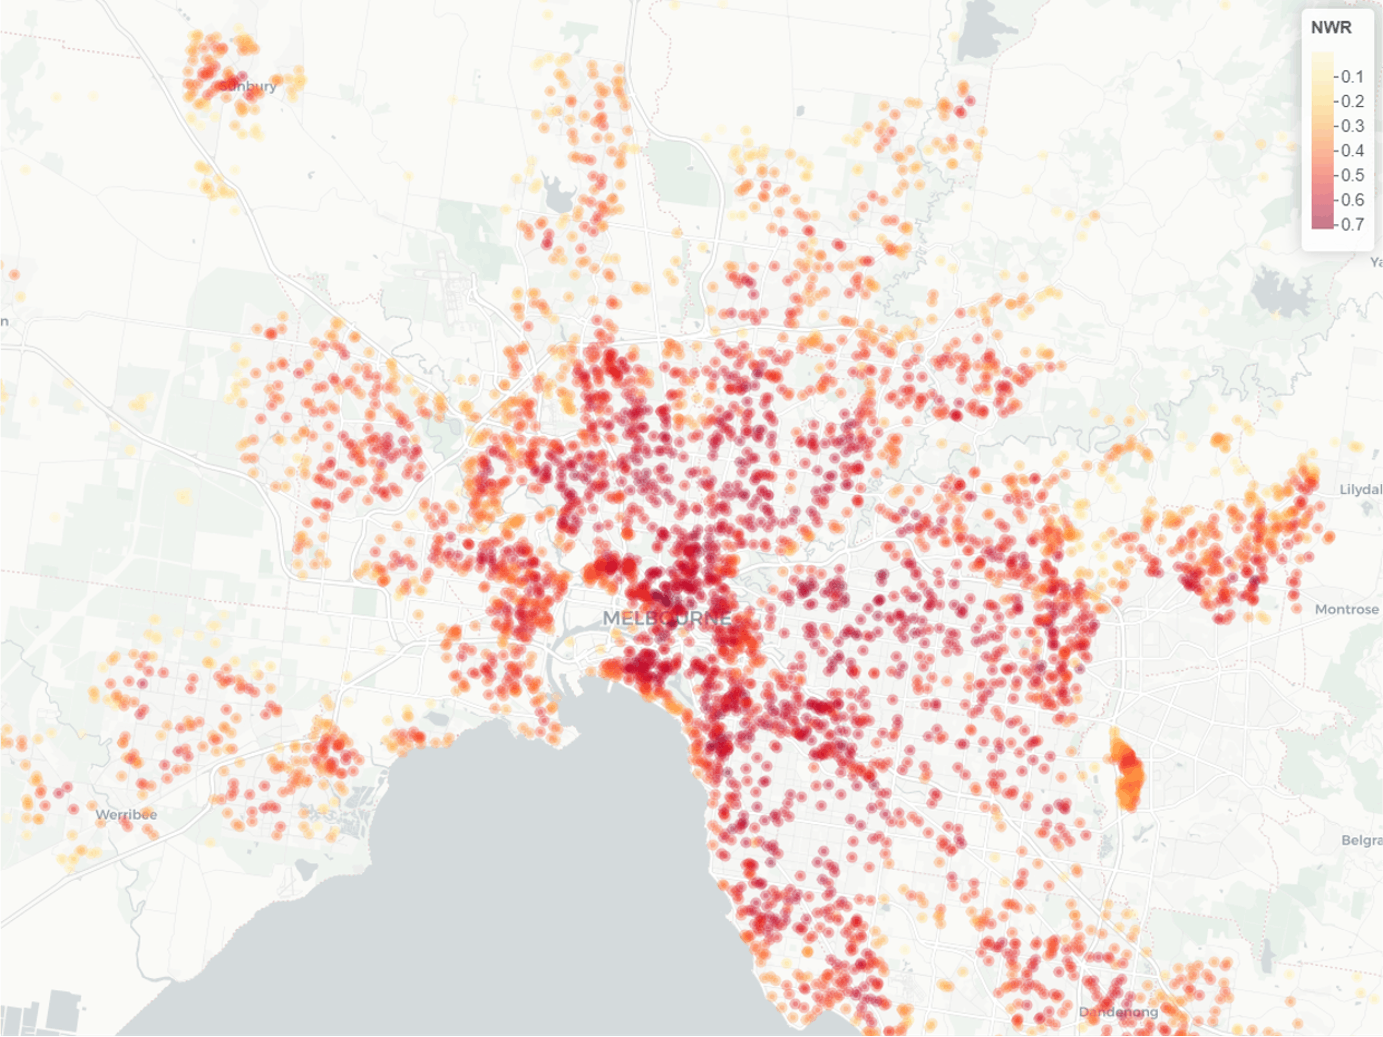 A map of Greater Melbourne showing how walkability varies across various suburbs of Melbourne